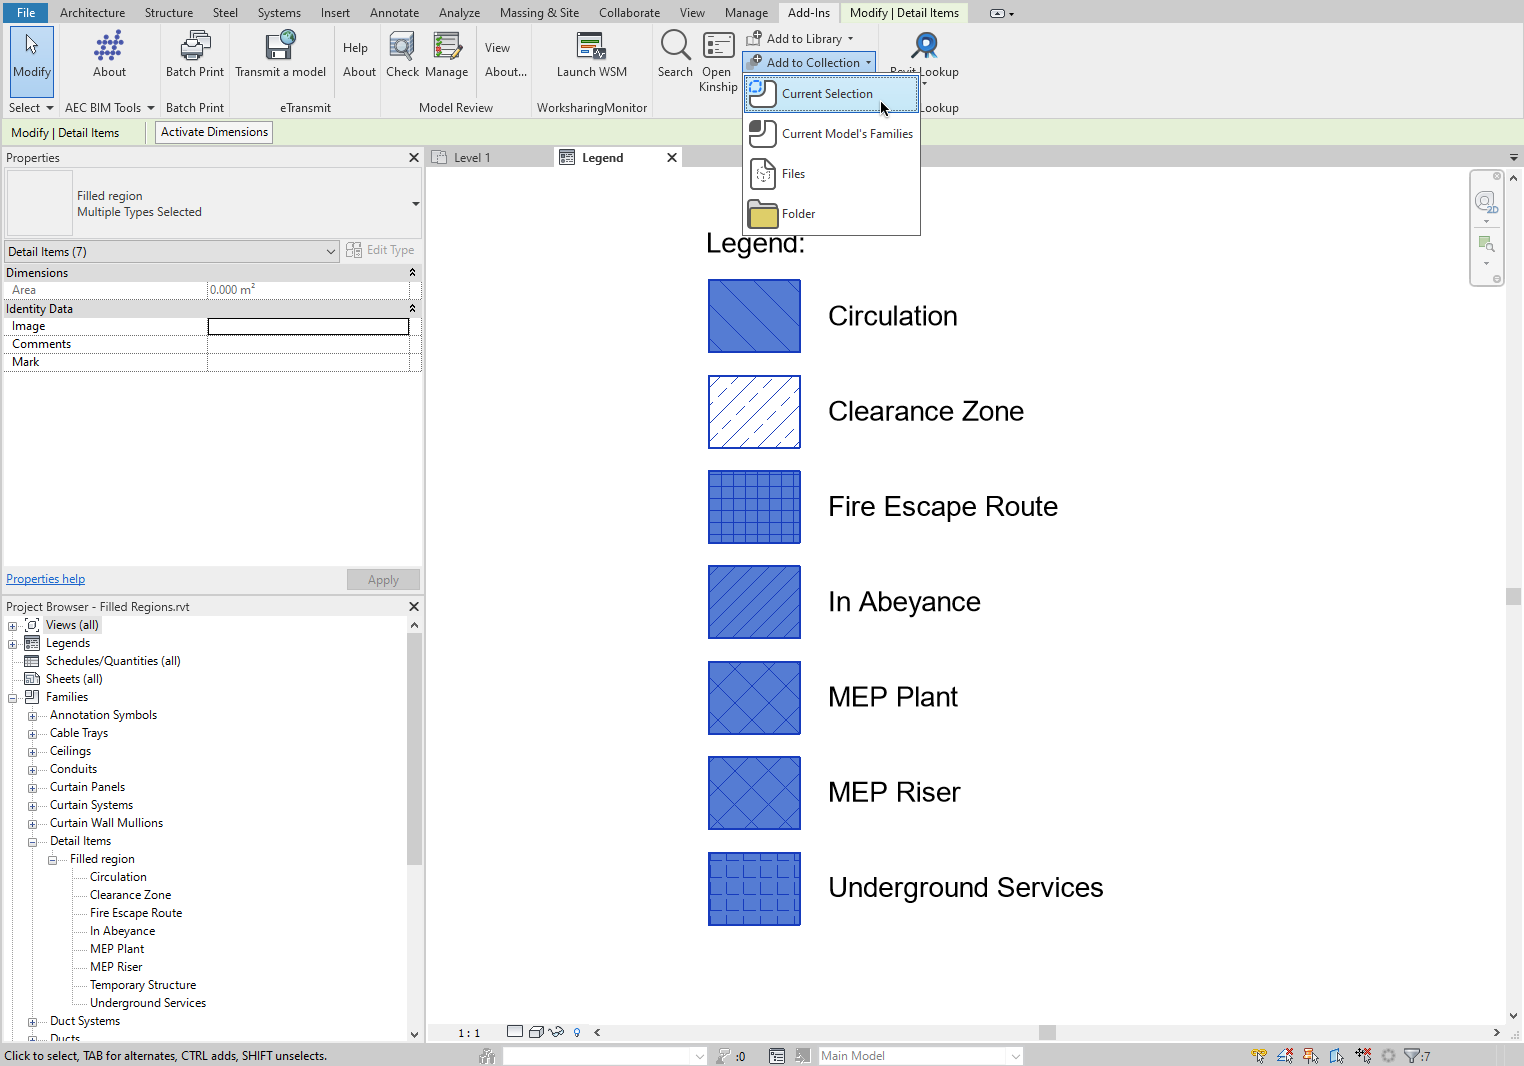 Upload selected Filled Regions to Kinship via the Revit add-in panel.